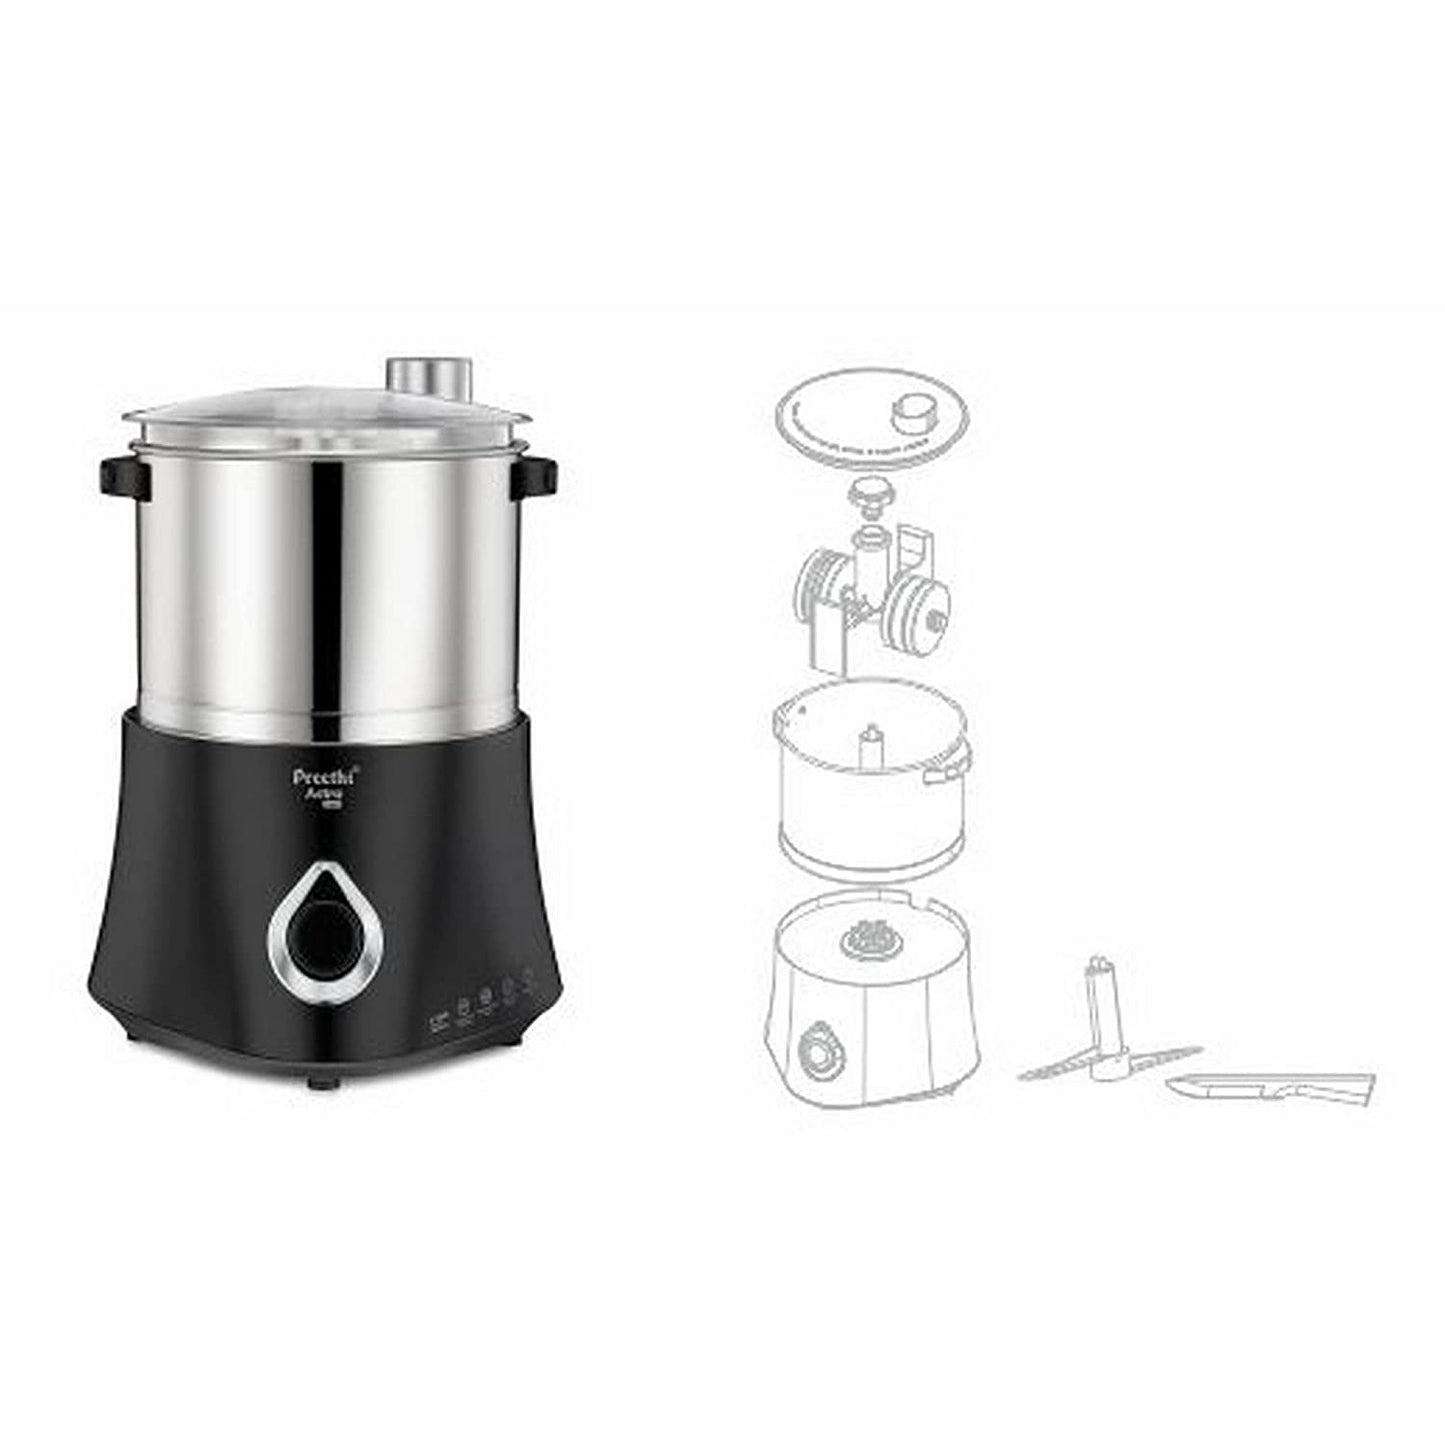 Preethi Astra Expert WG-909 Table Top Wet Grinder, 2 Litres (with Food Processor Jar Assembly)